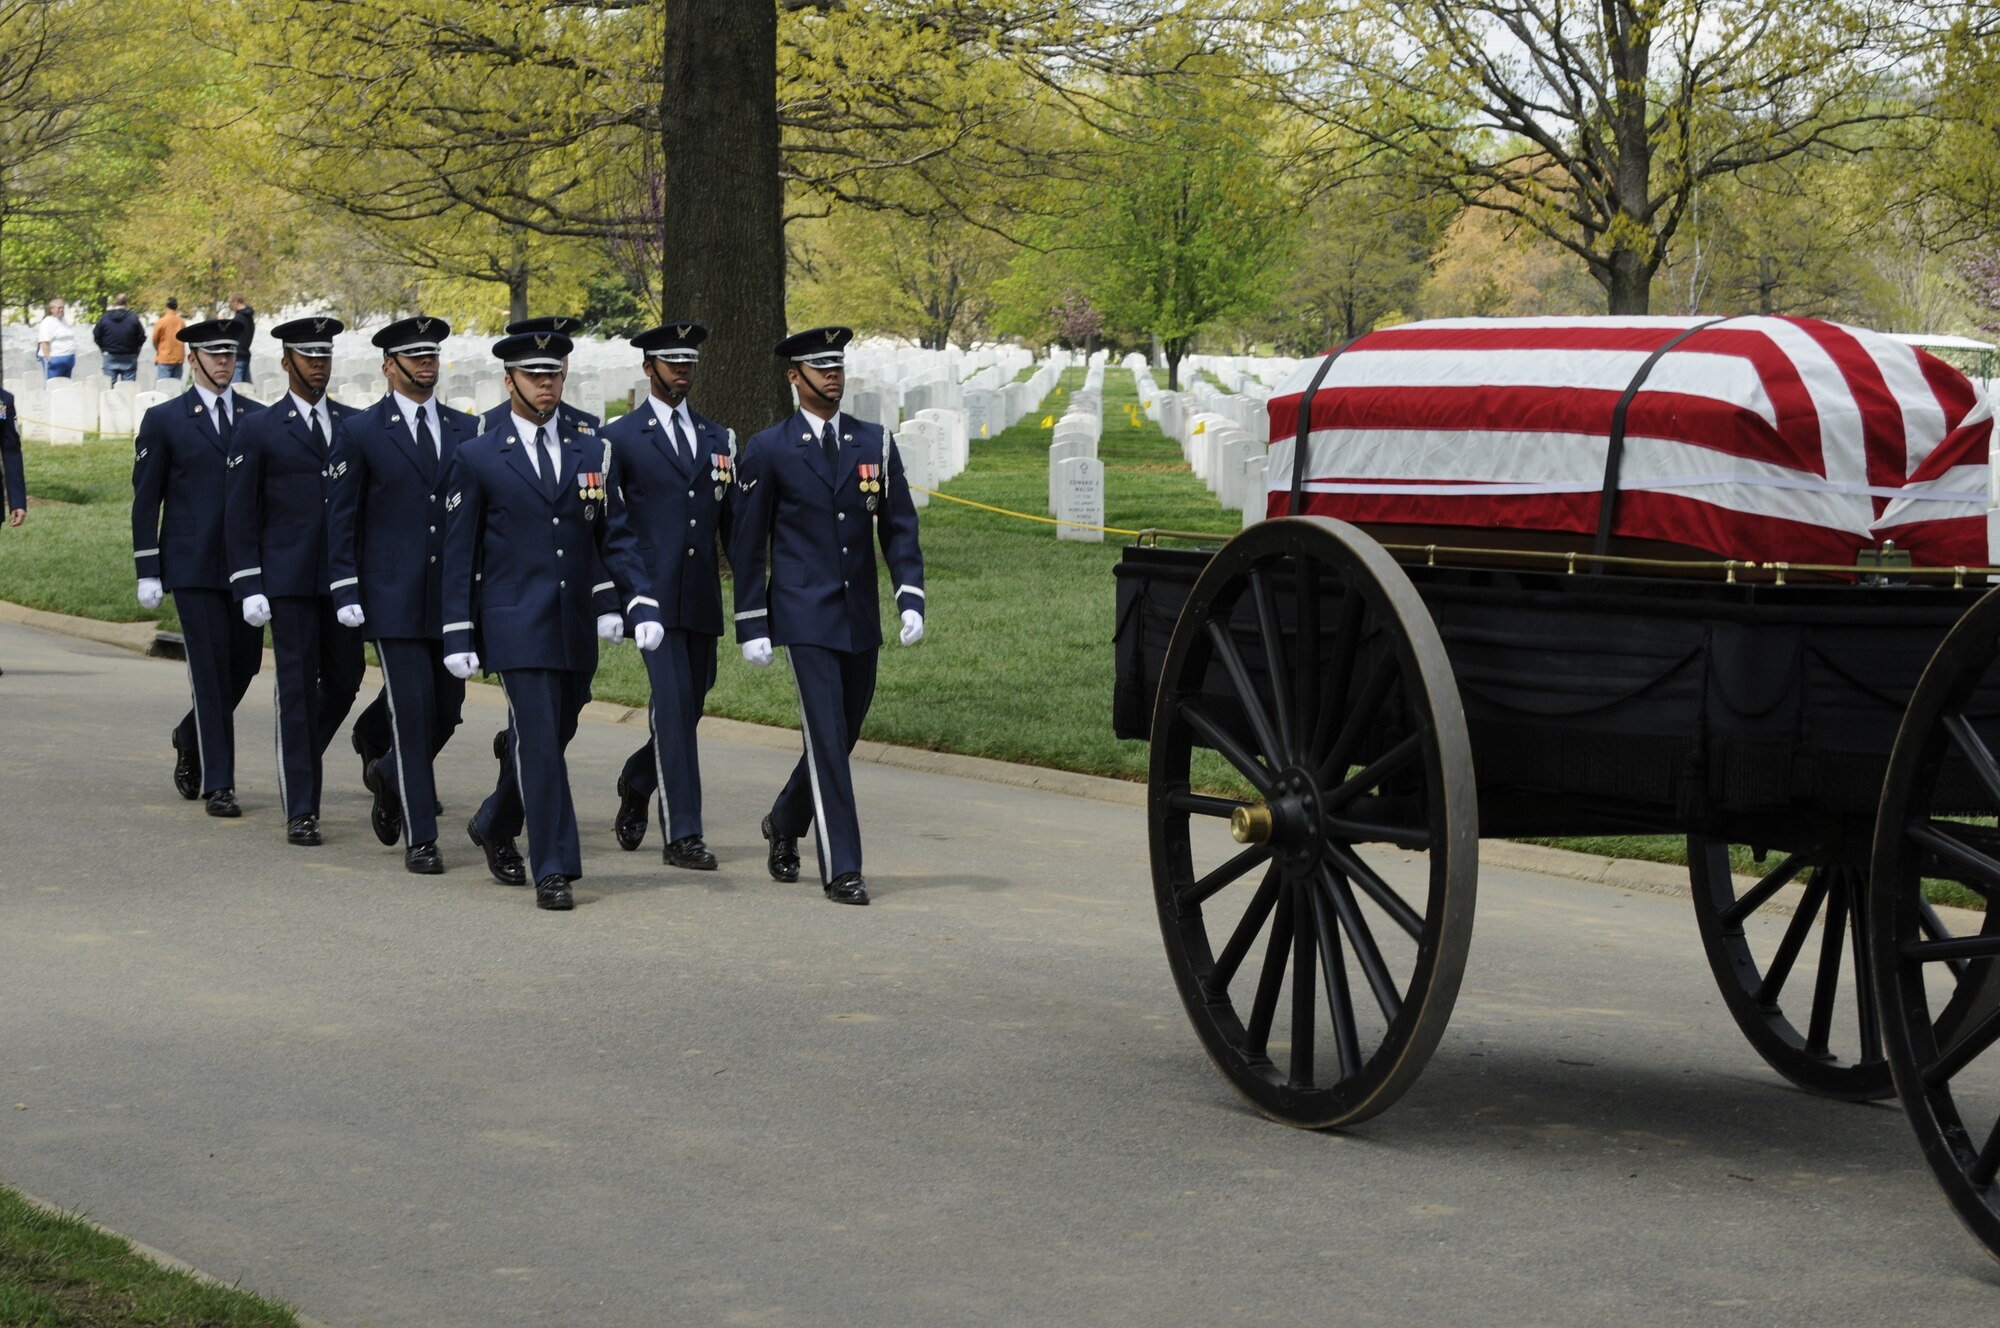 A United States Air Force Honor Guard body bearer team marches behind a caisson during a full honors funeral ceremony at Arlington National Cemetery. Honor guard body bearers train constantly to maintain the precision they are known for. Their standards of flawlessness are set out of necessity to honor fallen Airmen. (U.S. Air Force photo by Staff Sgt. Daniel DeCook)